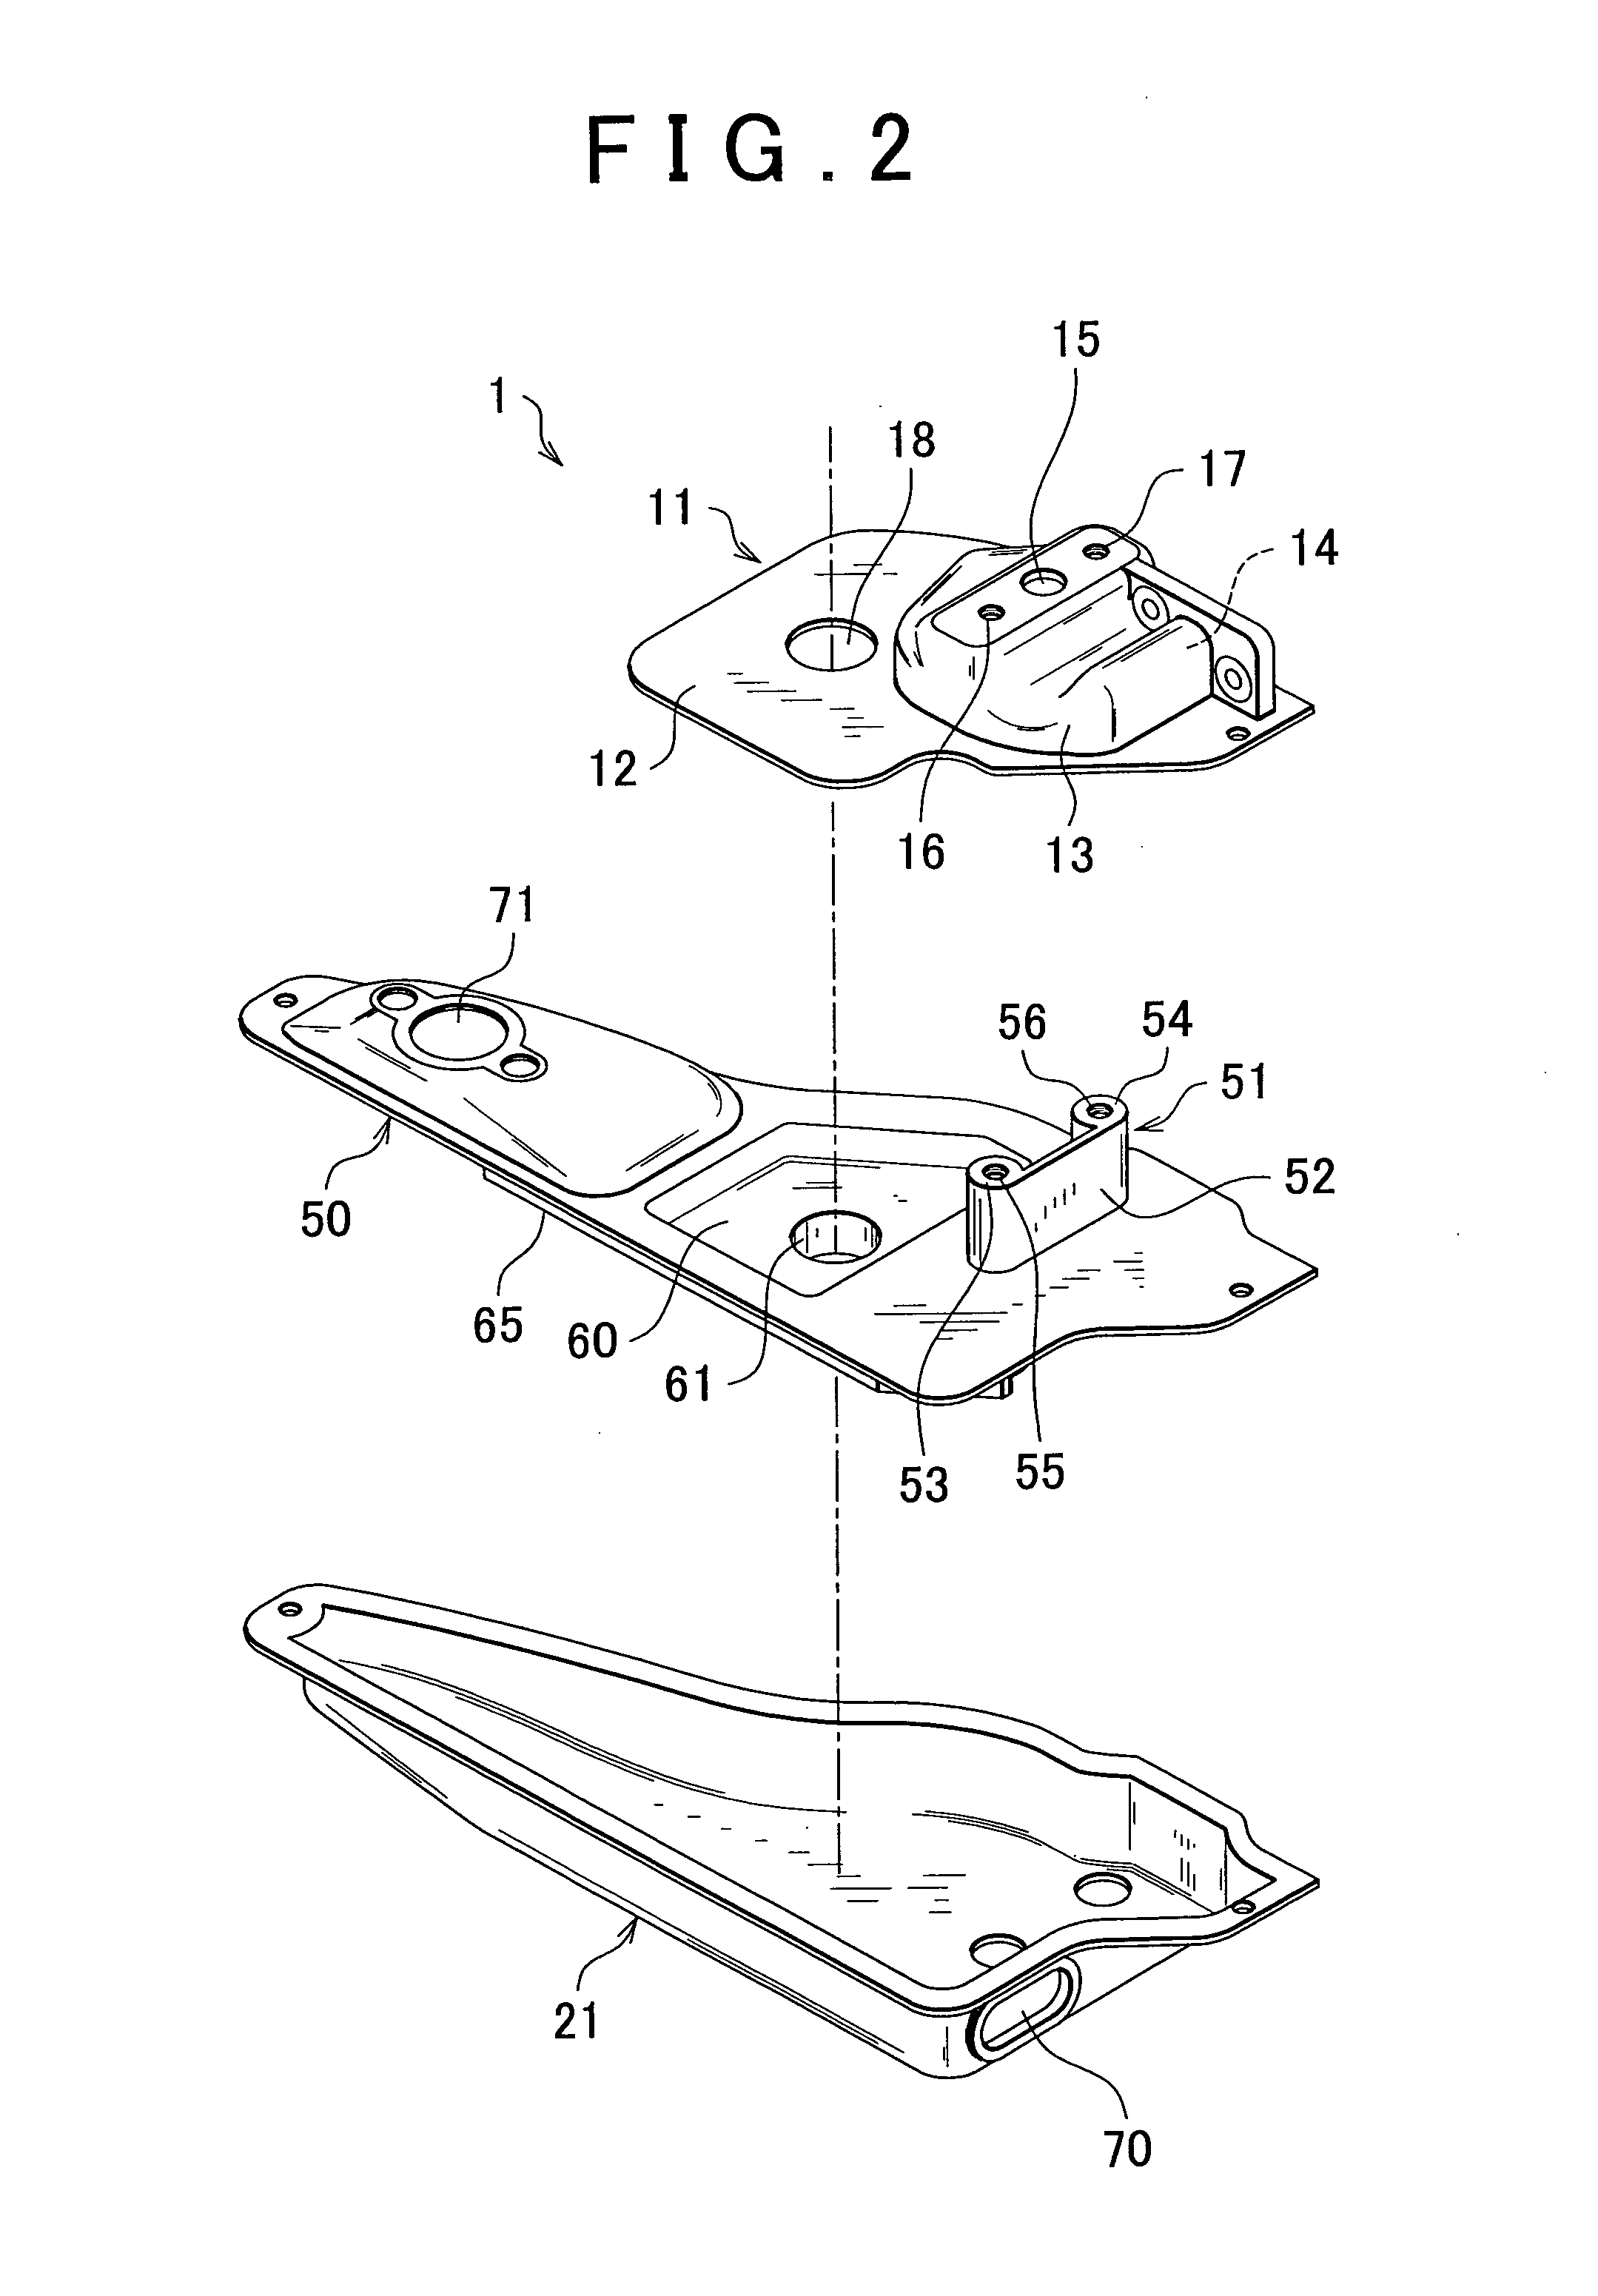 Integrated apparatus of gas-liquid separator and diluter